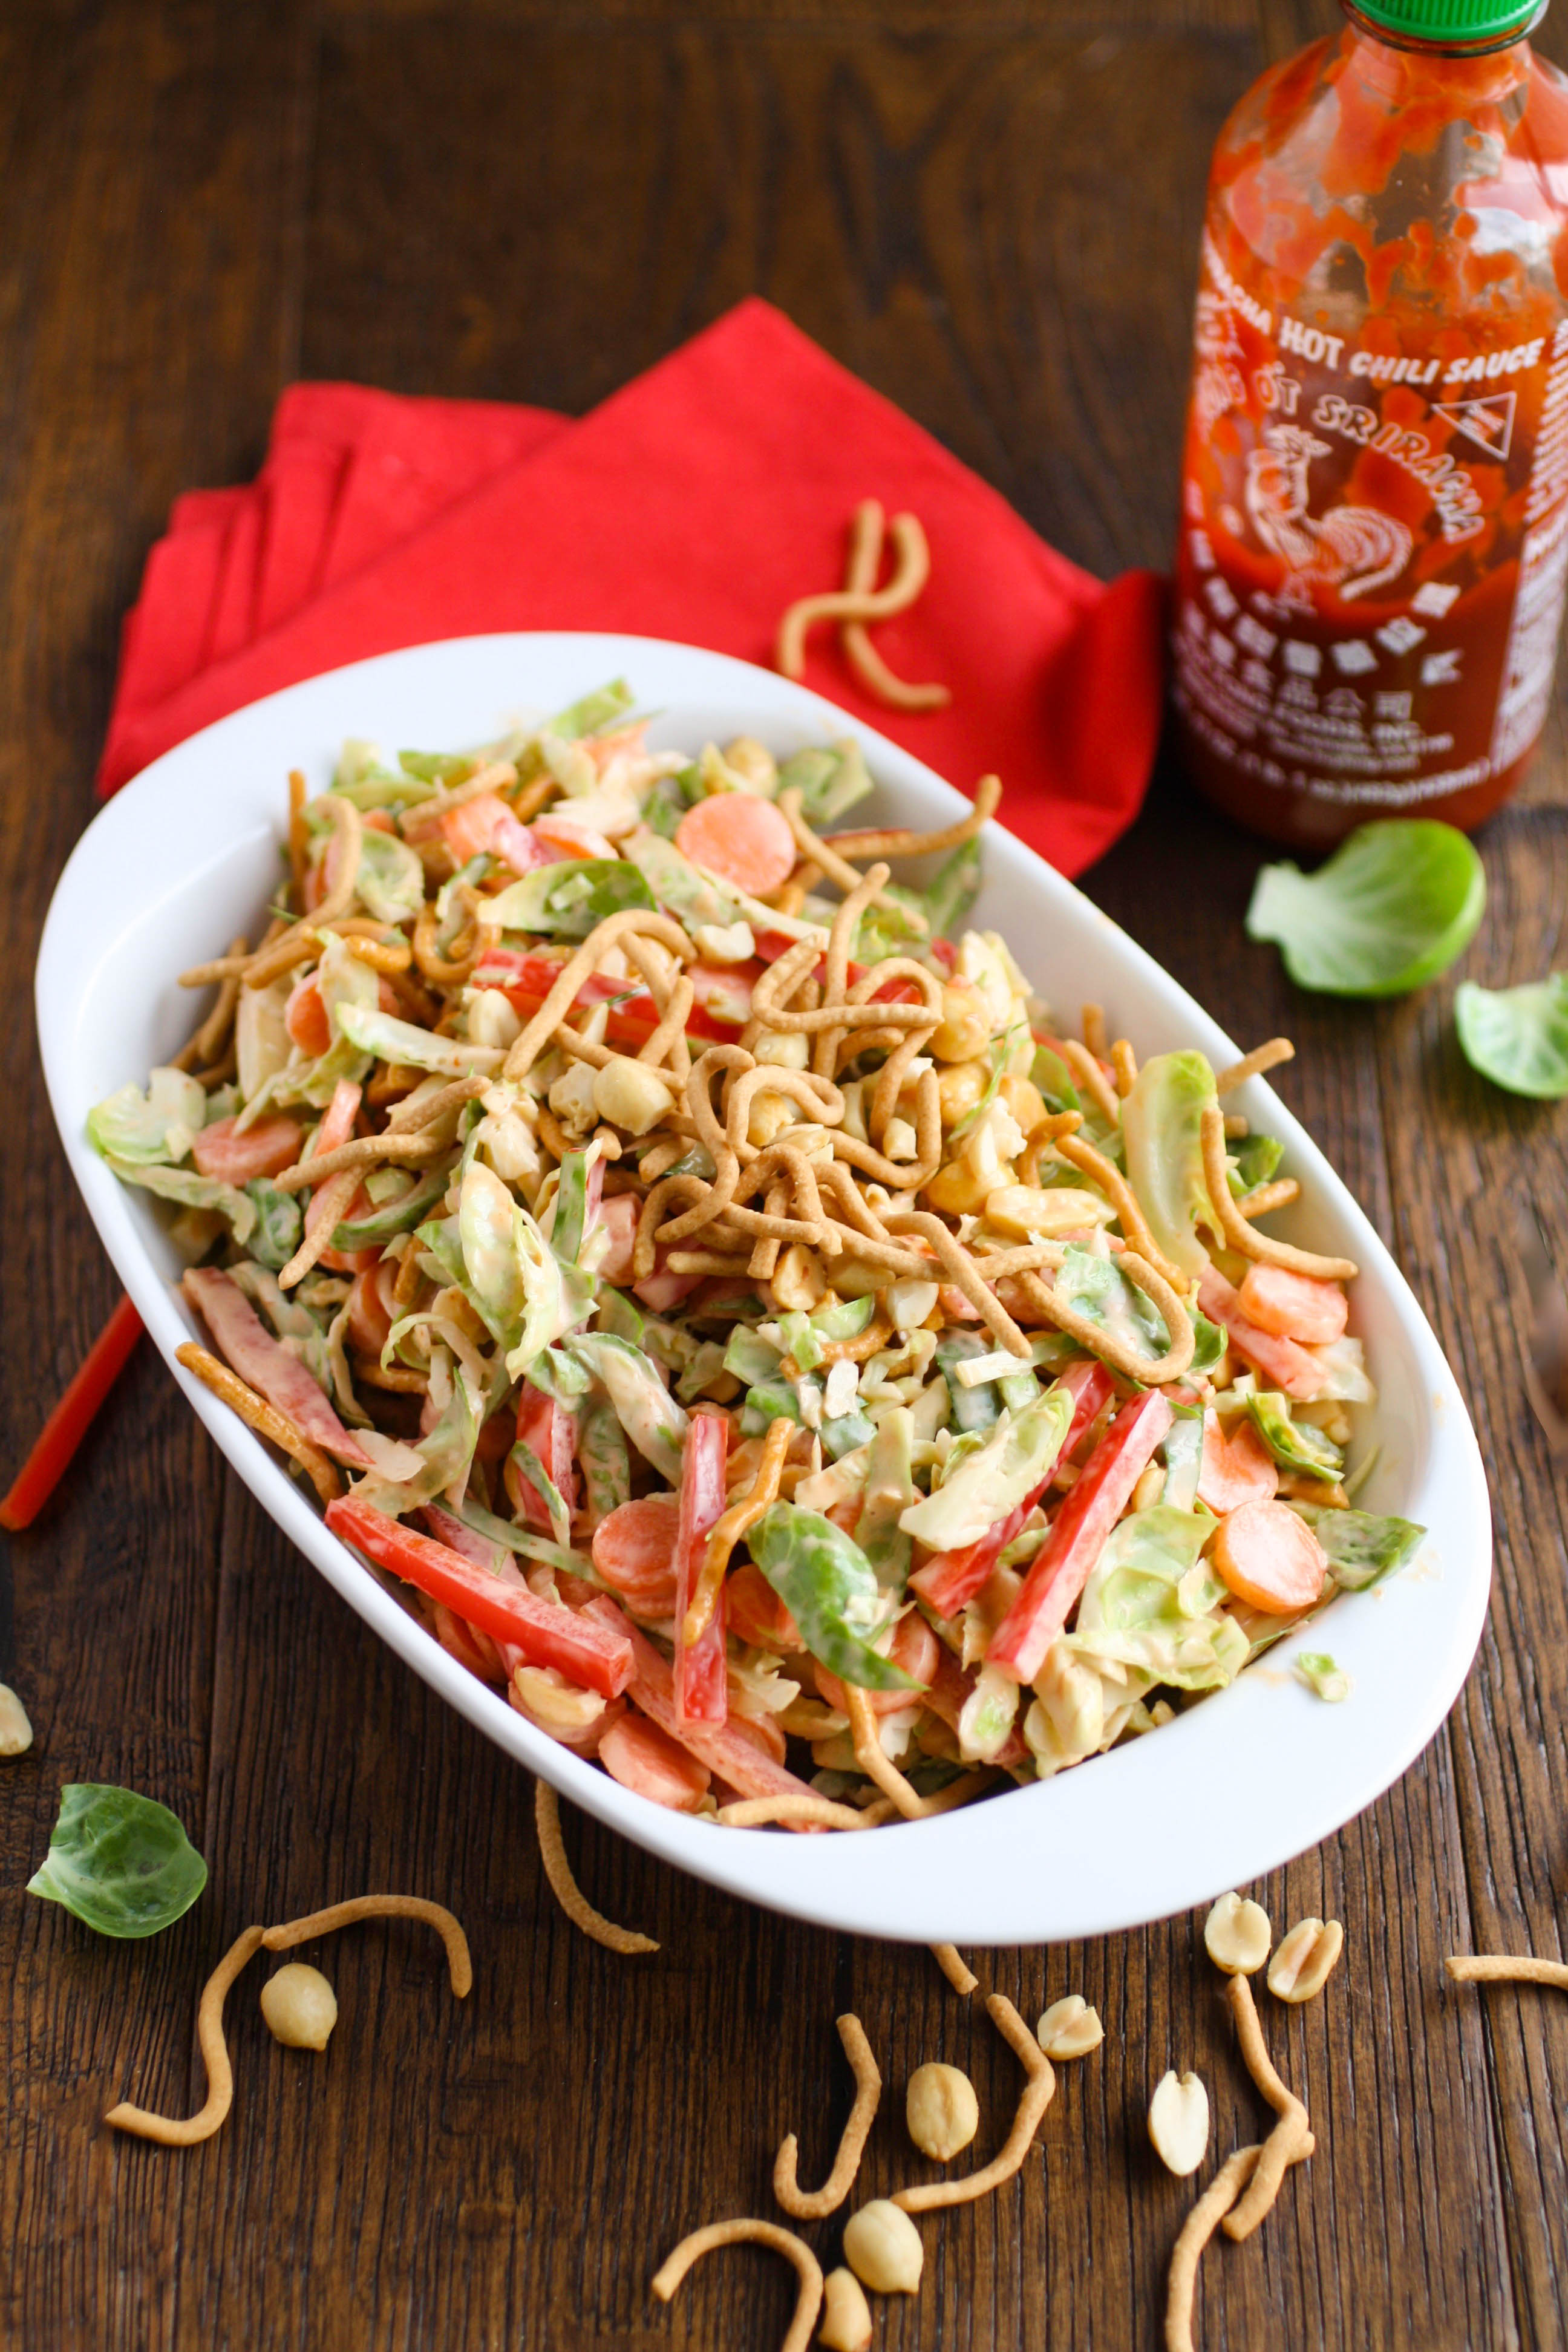 Crunchy Brussels Sprouts Salad with Creamy Sriracha Dressing is a new classic! You'll love all the textures and flavors!